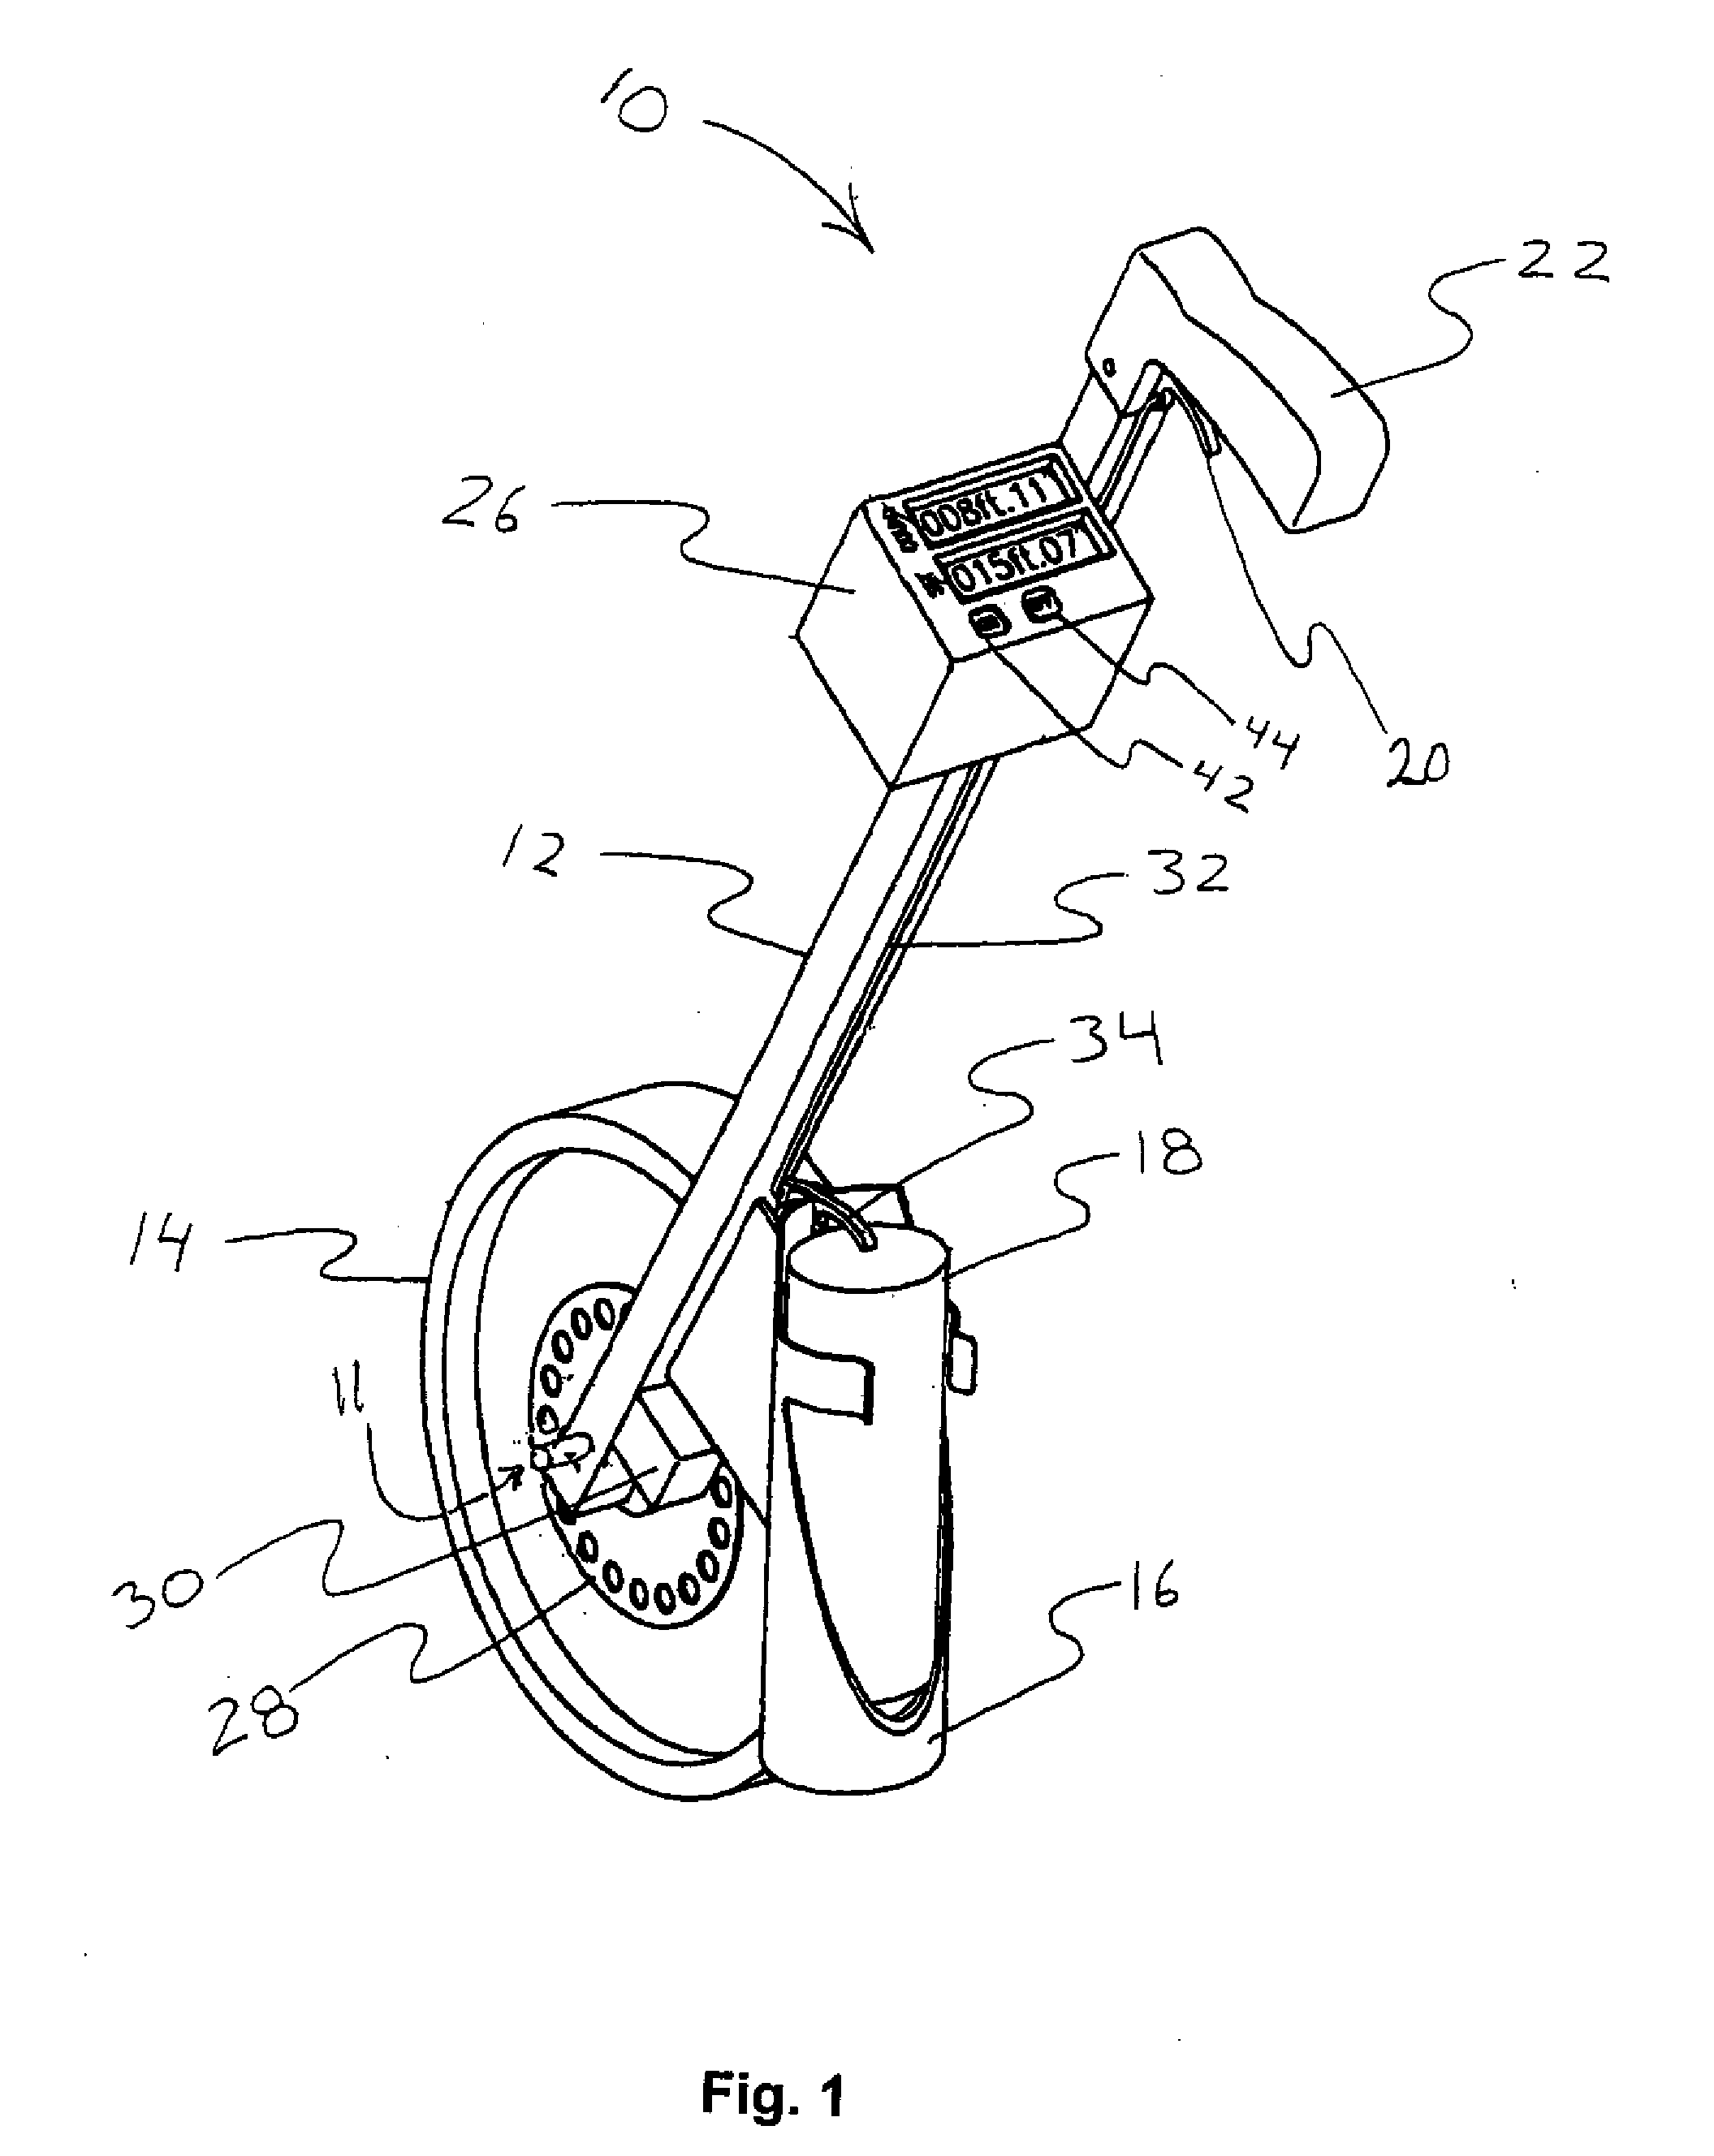 Measuring roller and spray device